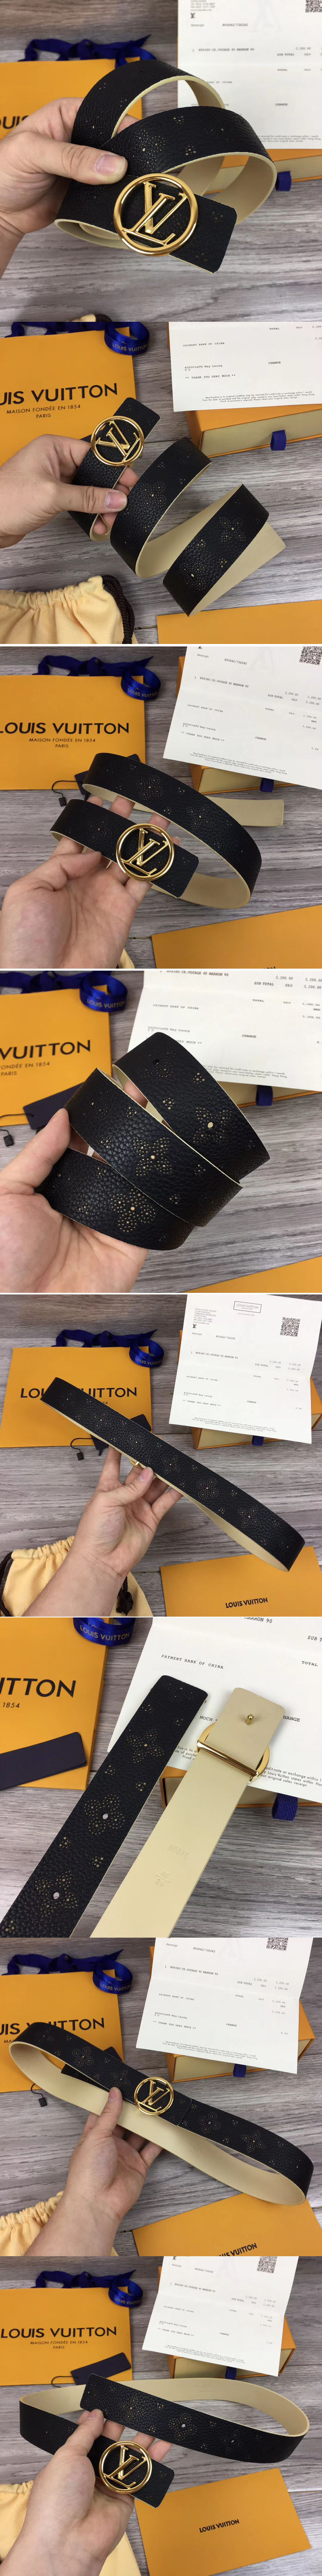 Replica Louis Vuitton M0008U LV Iconic 35MM Taurillon Leather Belts Gold Circle Buckle